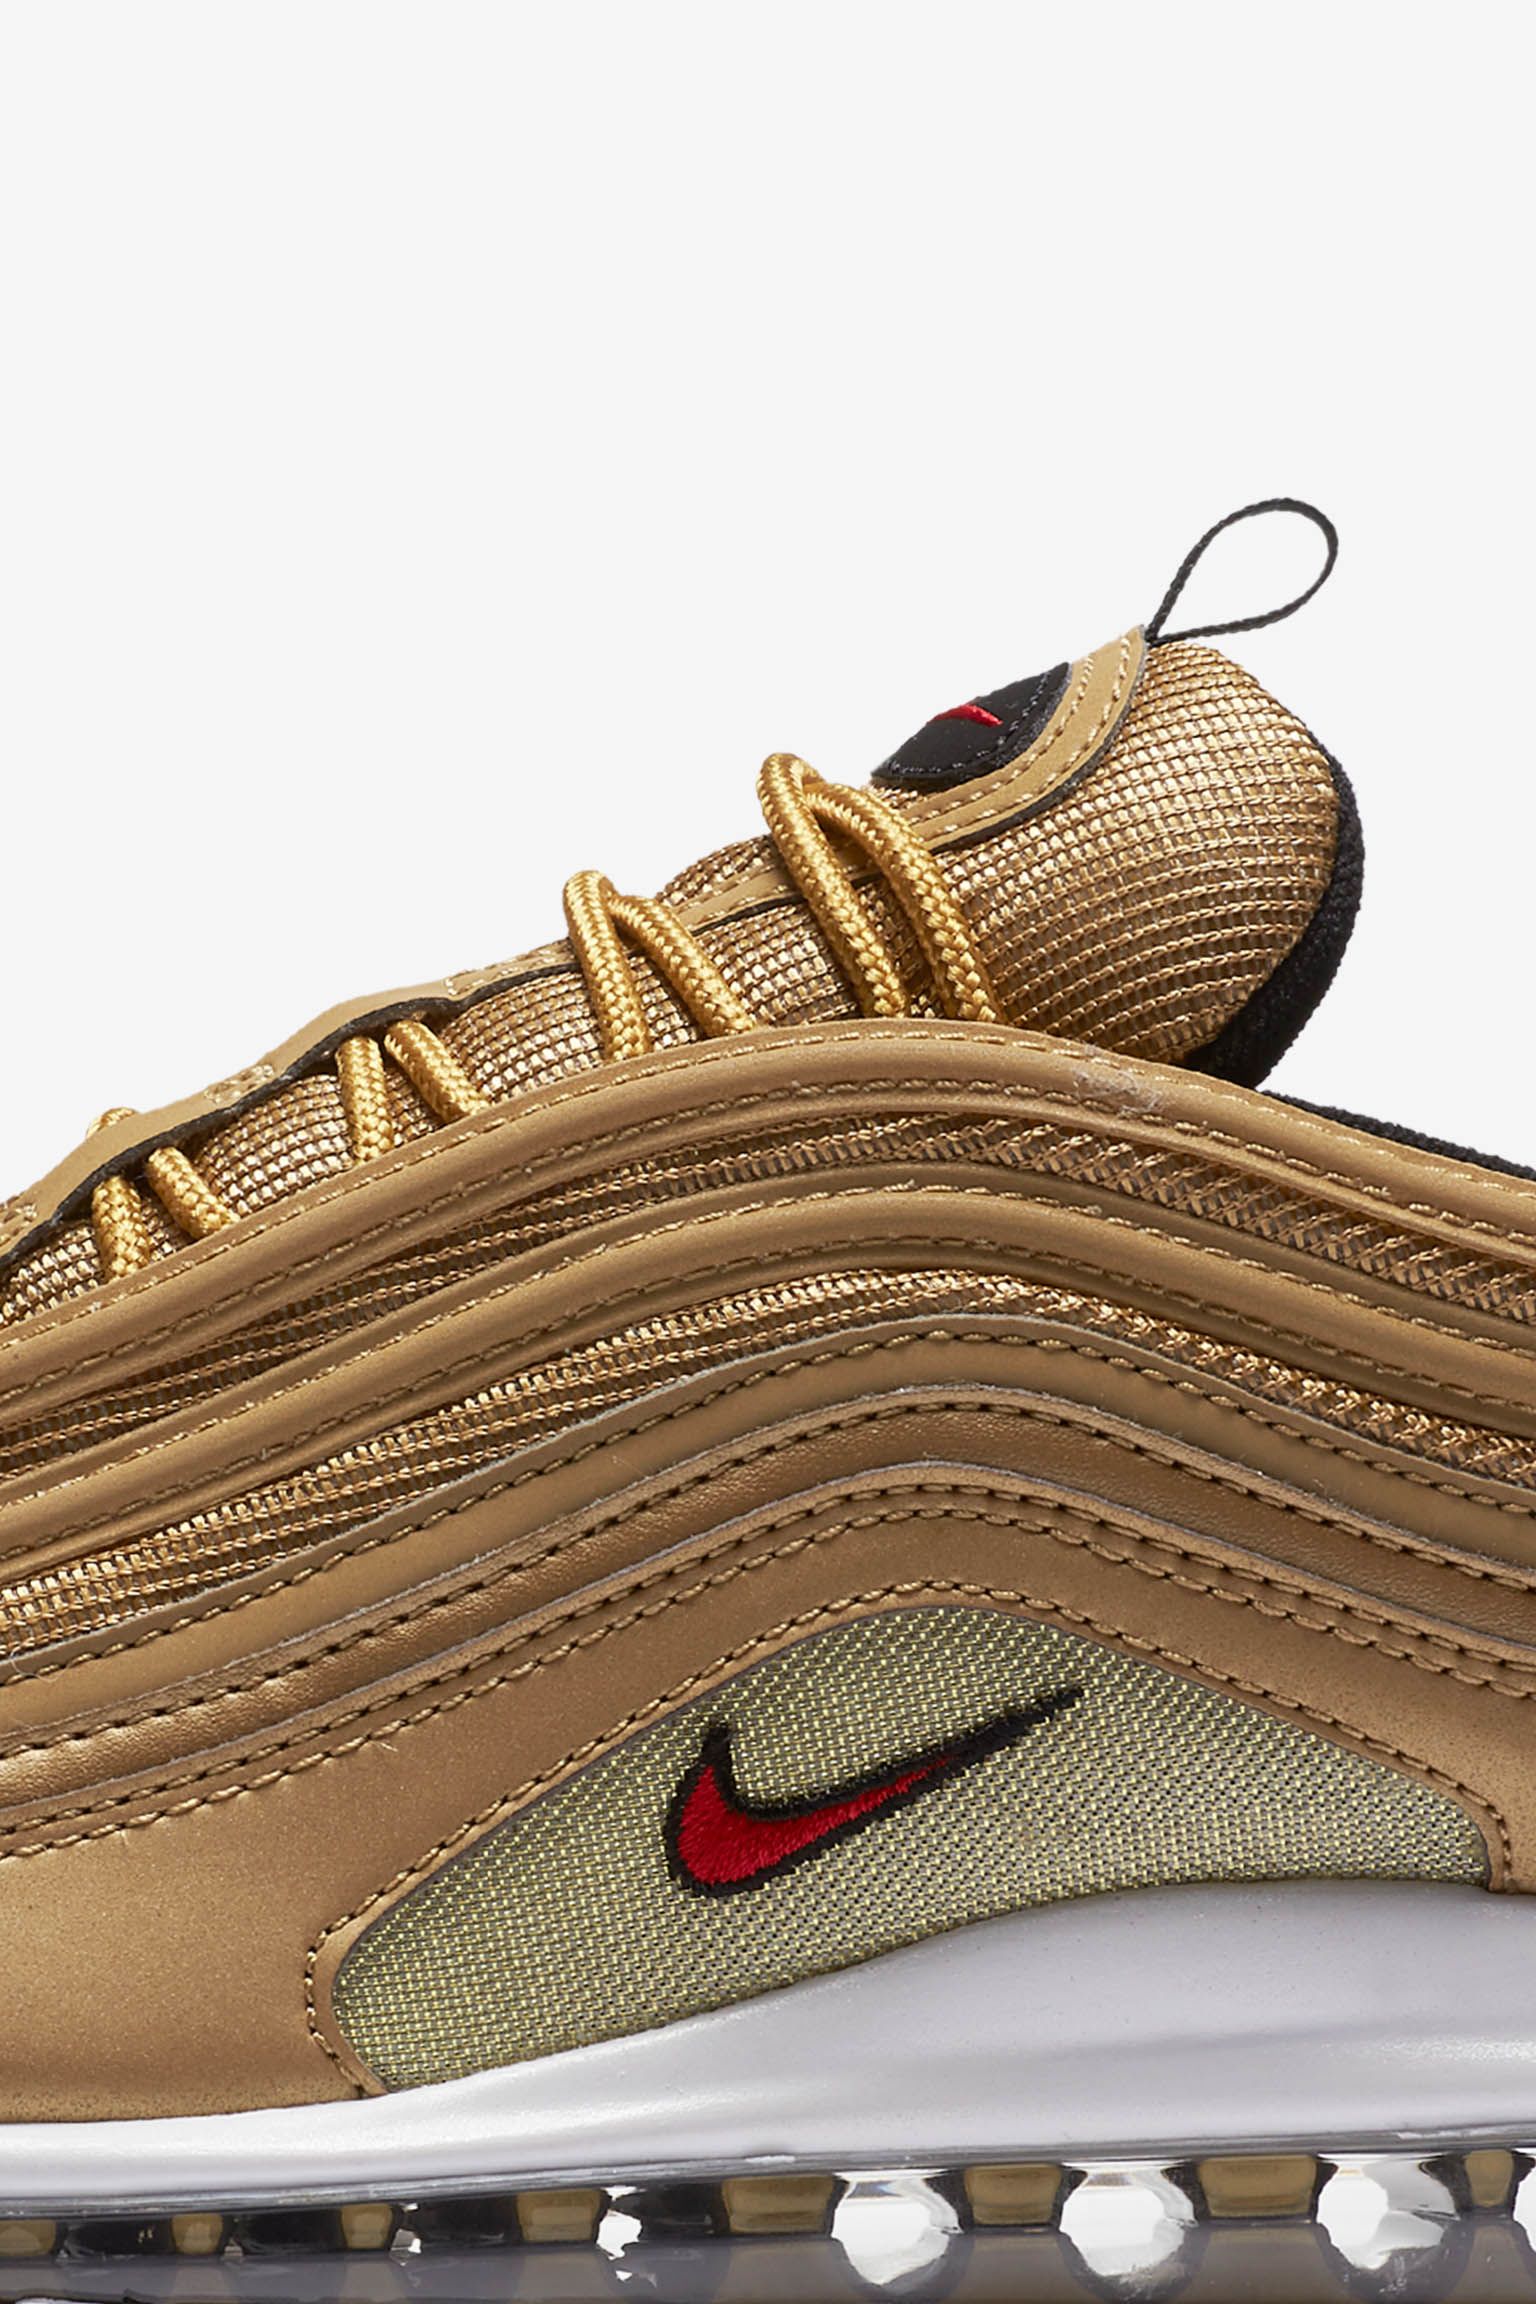 Nike Air Max 97 OG QS 'Metallic Gold' Release Date. Nike SNKRS افضل سم للصراصير